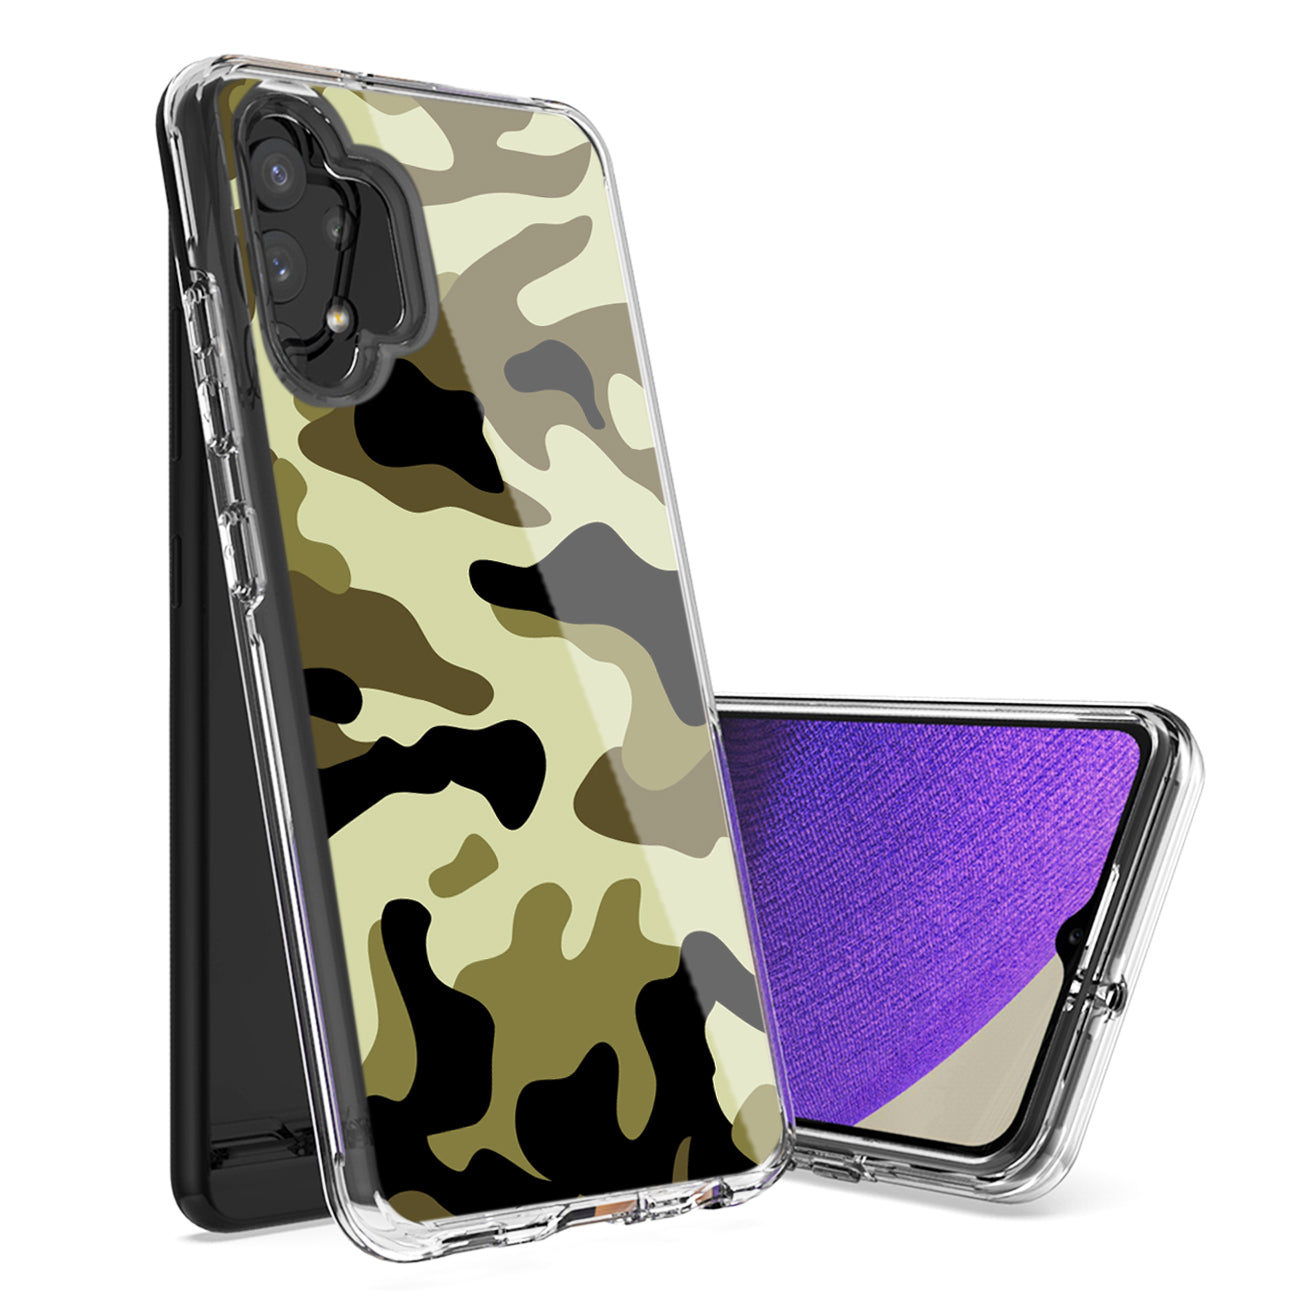 Camouflage Dual Layer Hybrid Hard & Soft TPU Rubber Case for SAMS GALAXY A32 5G In Green